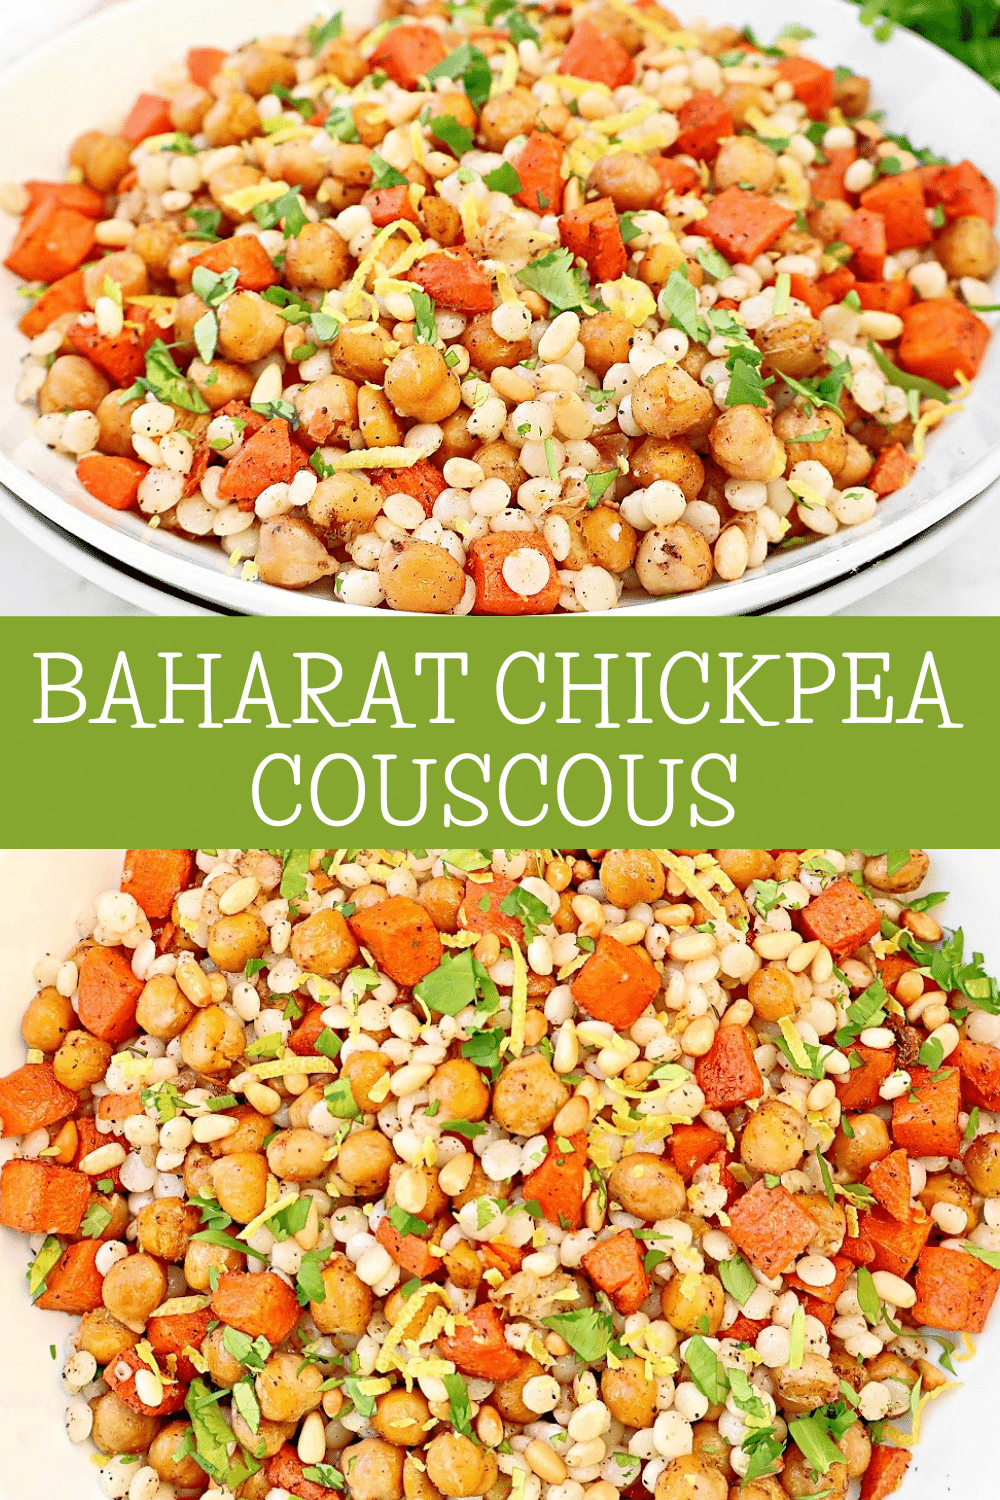 Baharat Chickpea Couscous ~ Pearl couscous with roasted chickpeas, carrots, and a warm blend of Middle Eastern spices. via @thiswifecooks